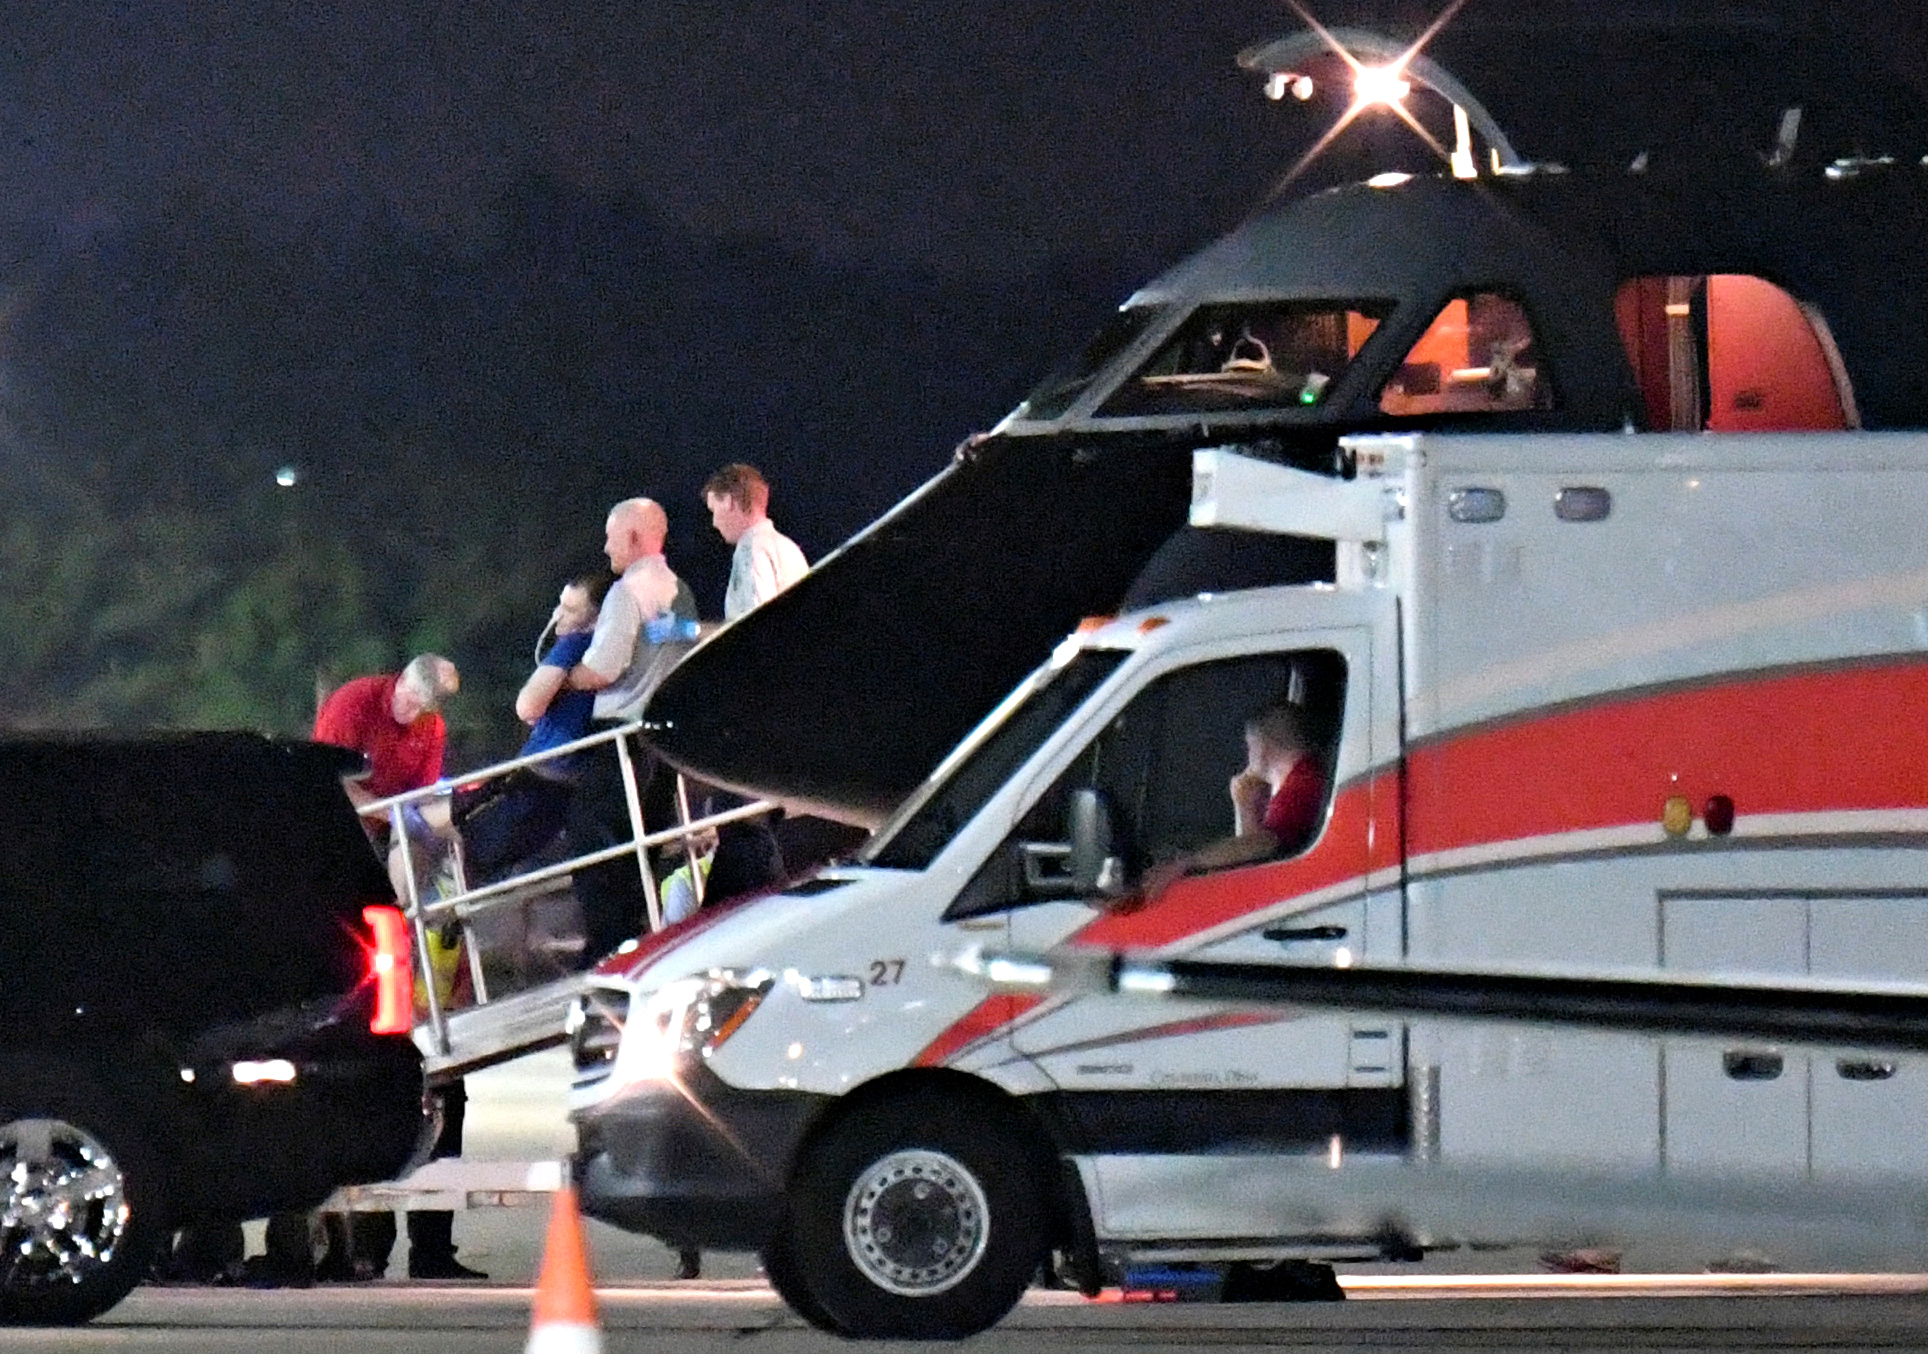 A person believed to be Otto Warmbier is transferred from a medical transport airplane to an awaiting ambulance at Lunken Airport in Cincinnati